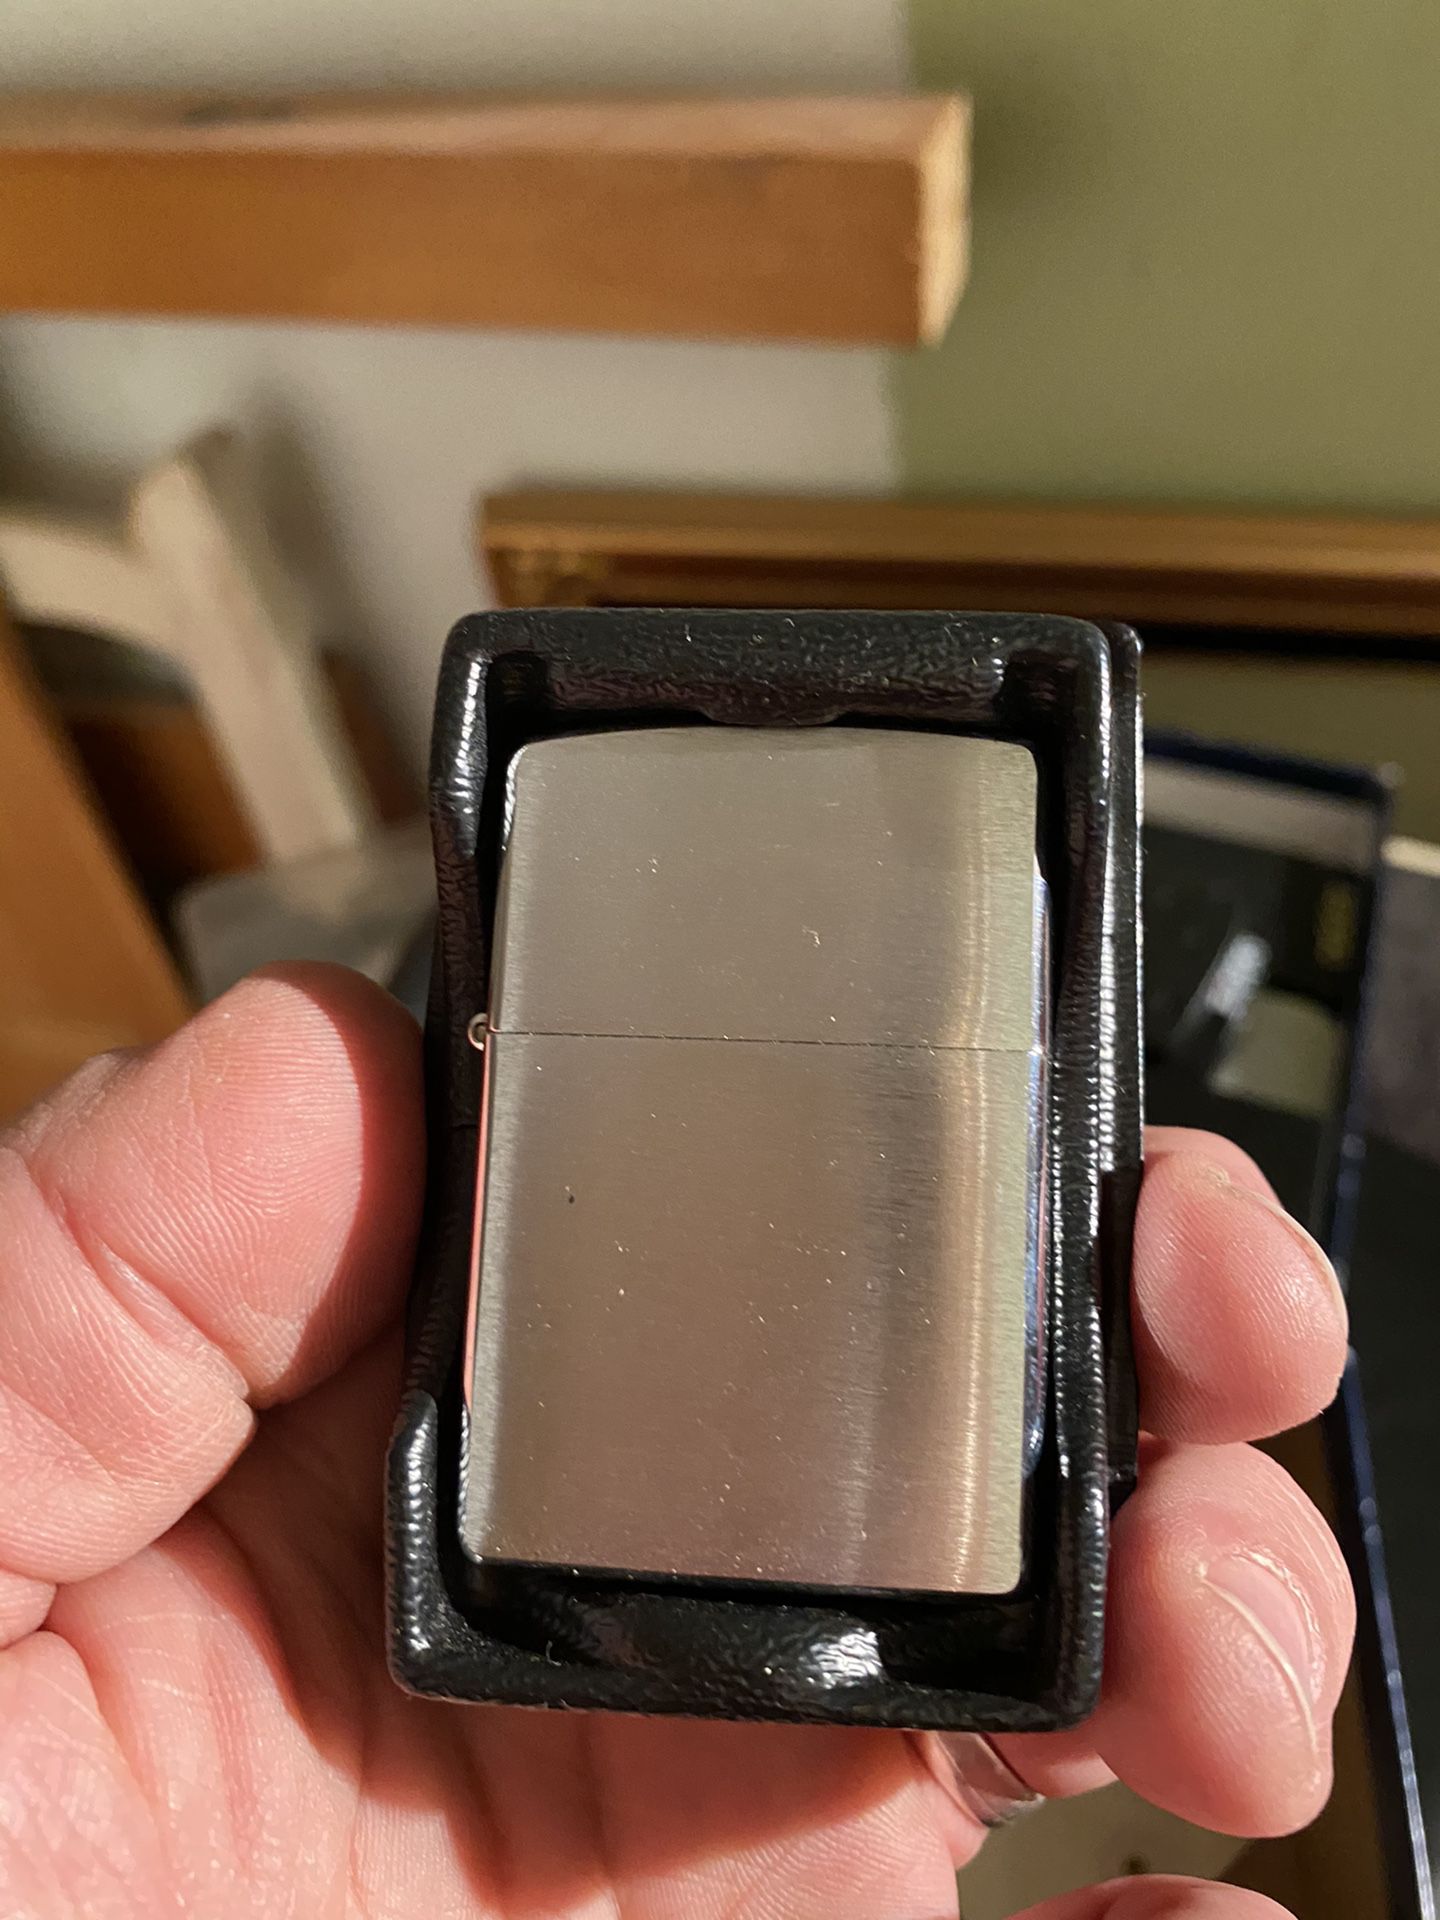 Brand New Zippo never used 15 years old